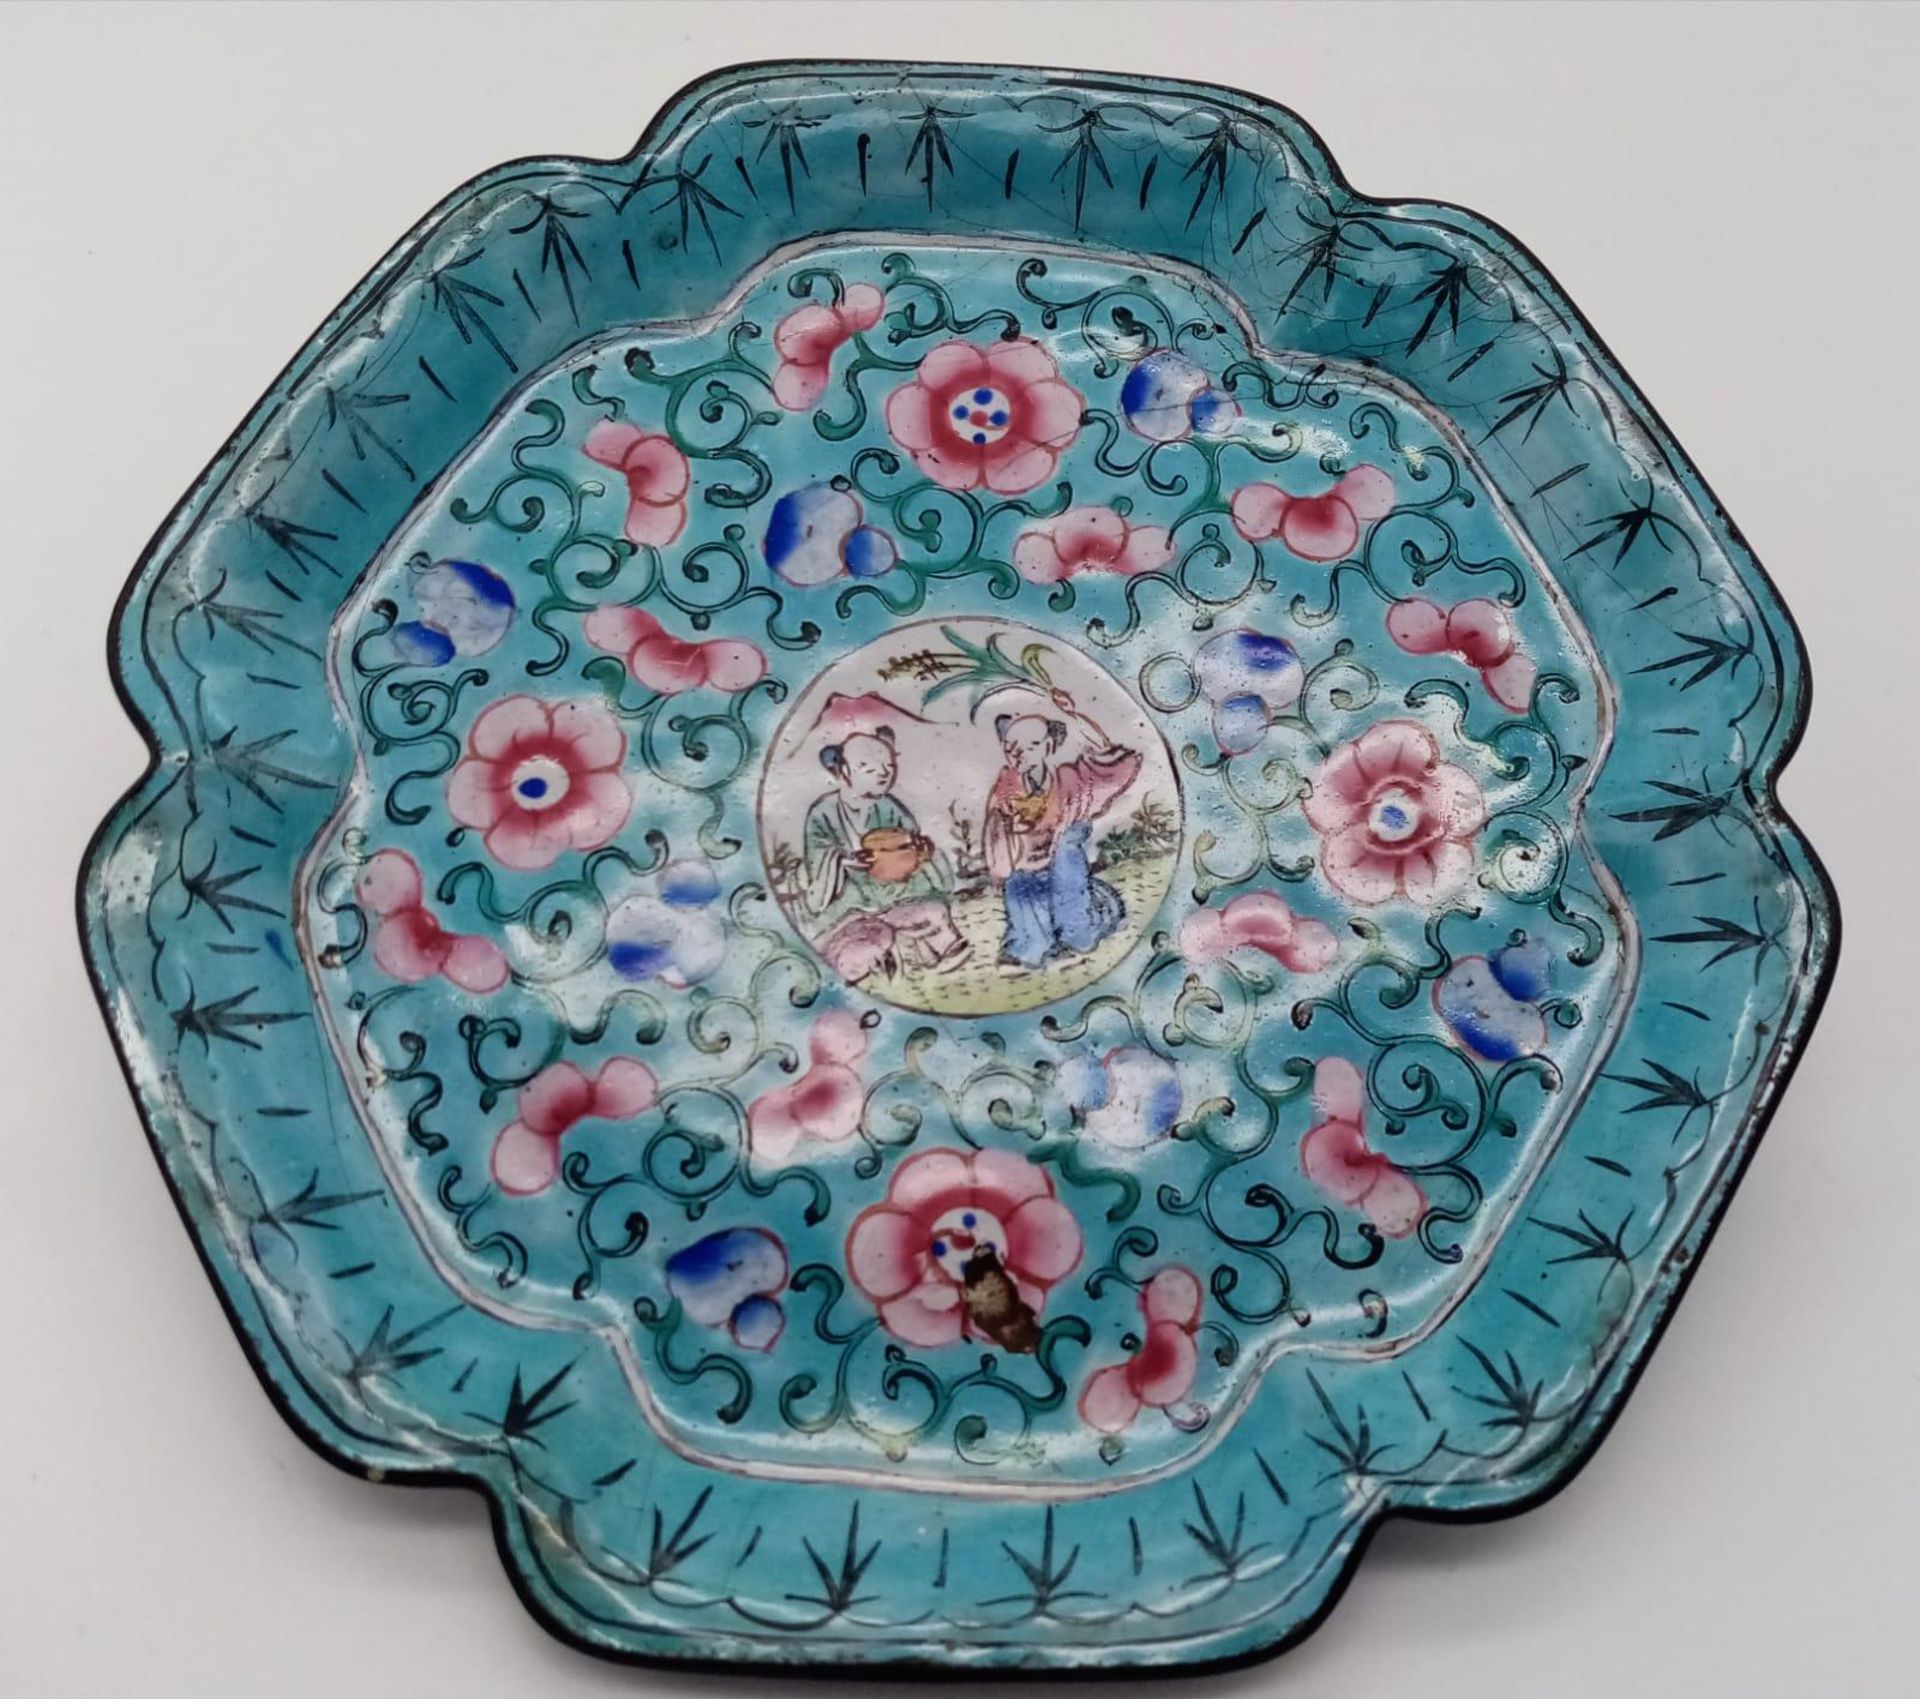 Stunning Early 19th Century, possibly 18th, Canton Enamel Dish. Wonderful turquoise blue,